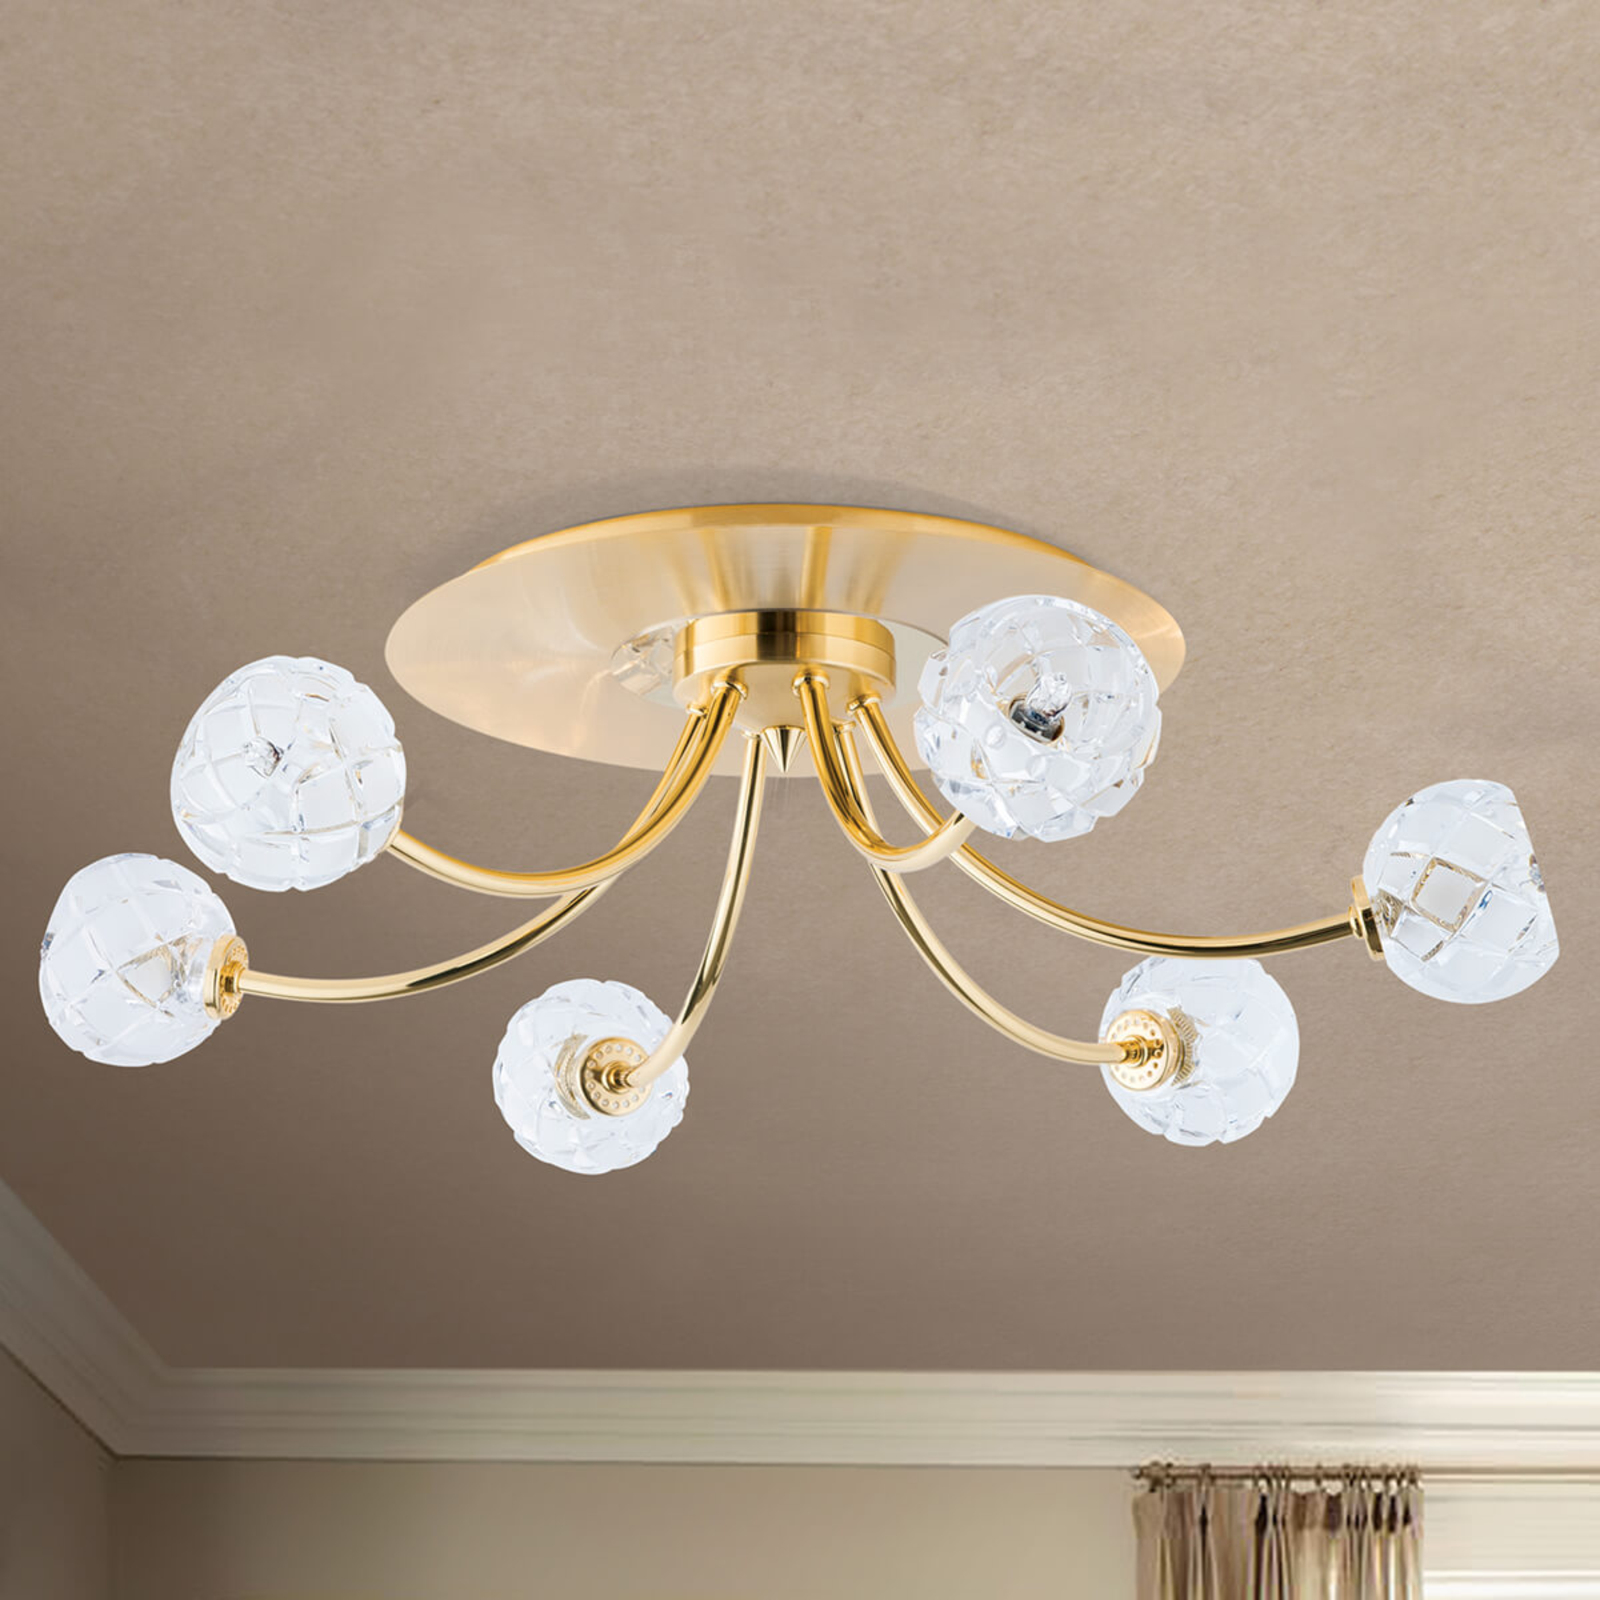 Lead crystal ceiling light Maderno, gold, 57 cm